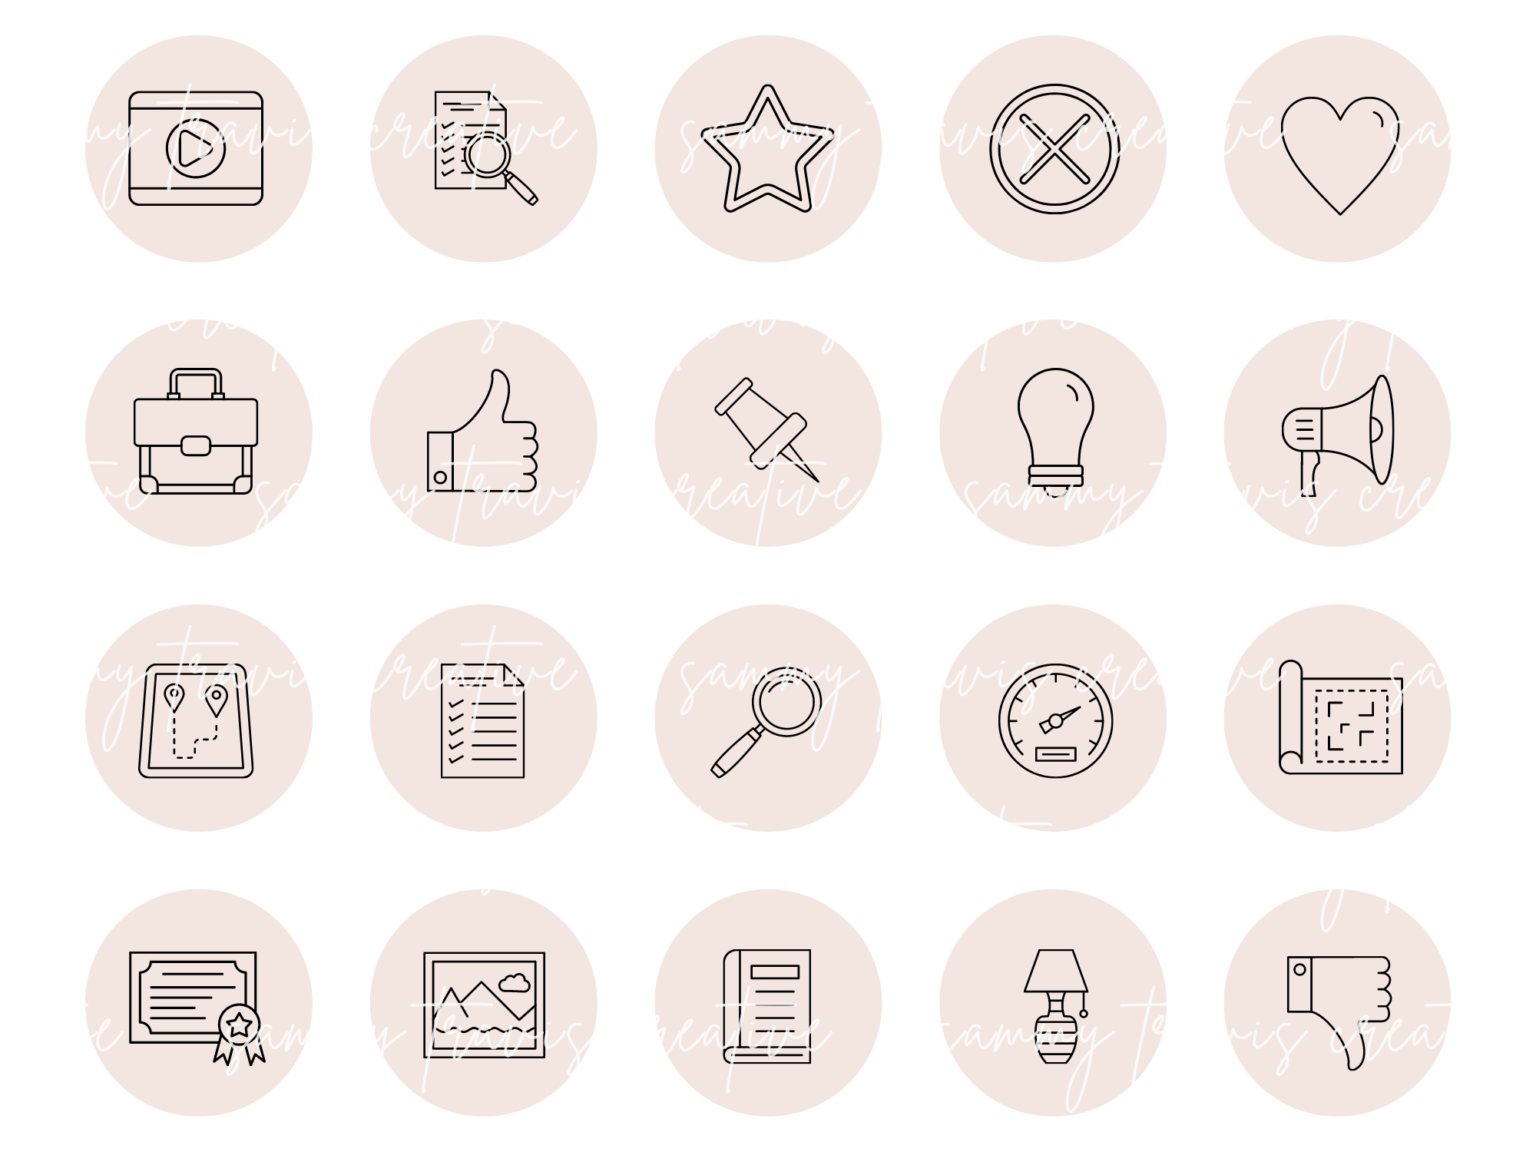 300+ Light Pink Instagram Highlight Cover Icons - Samantha Anne Creative